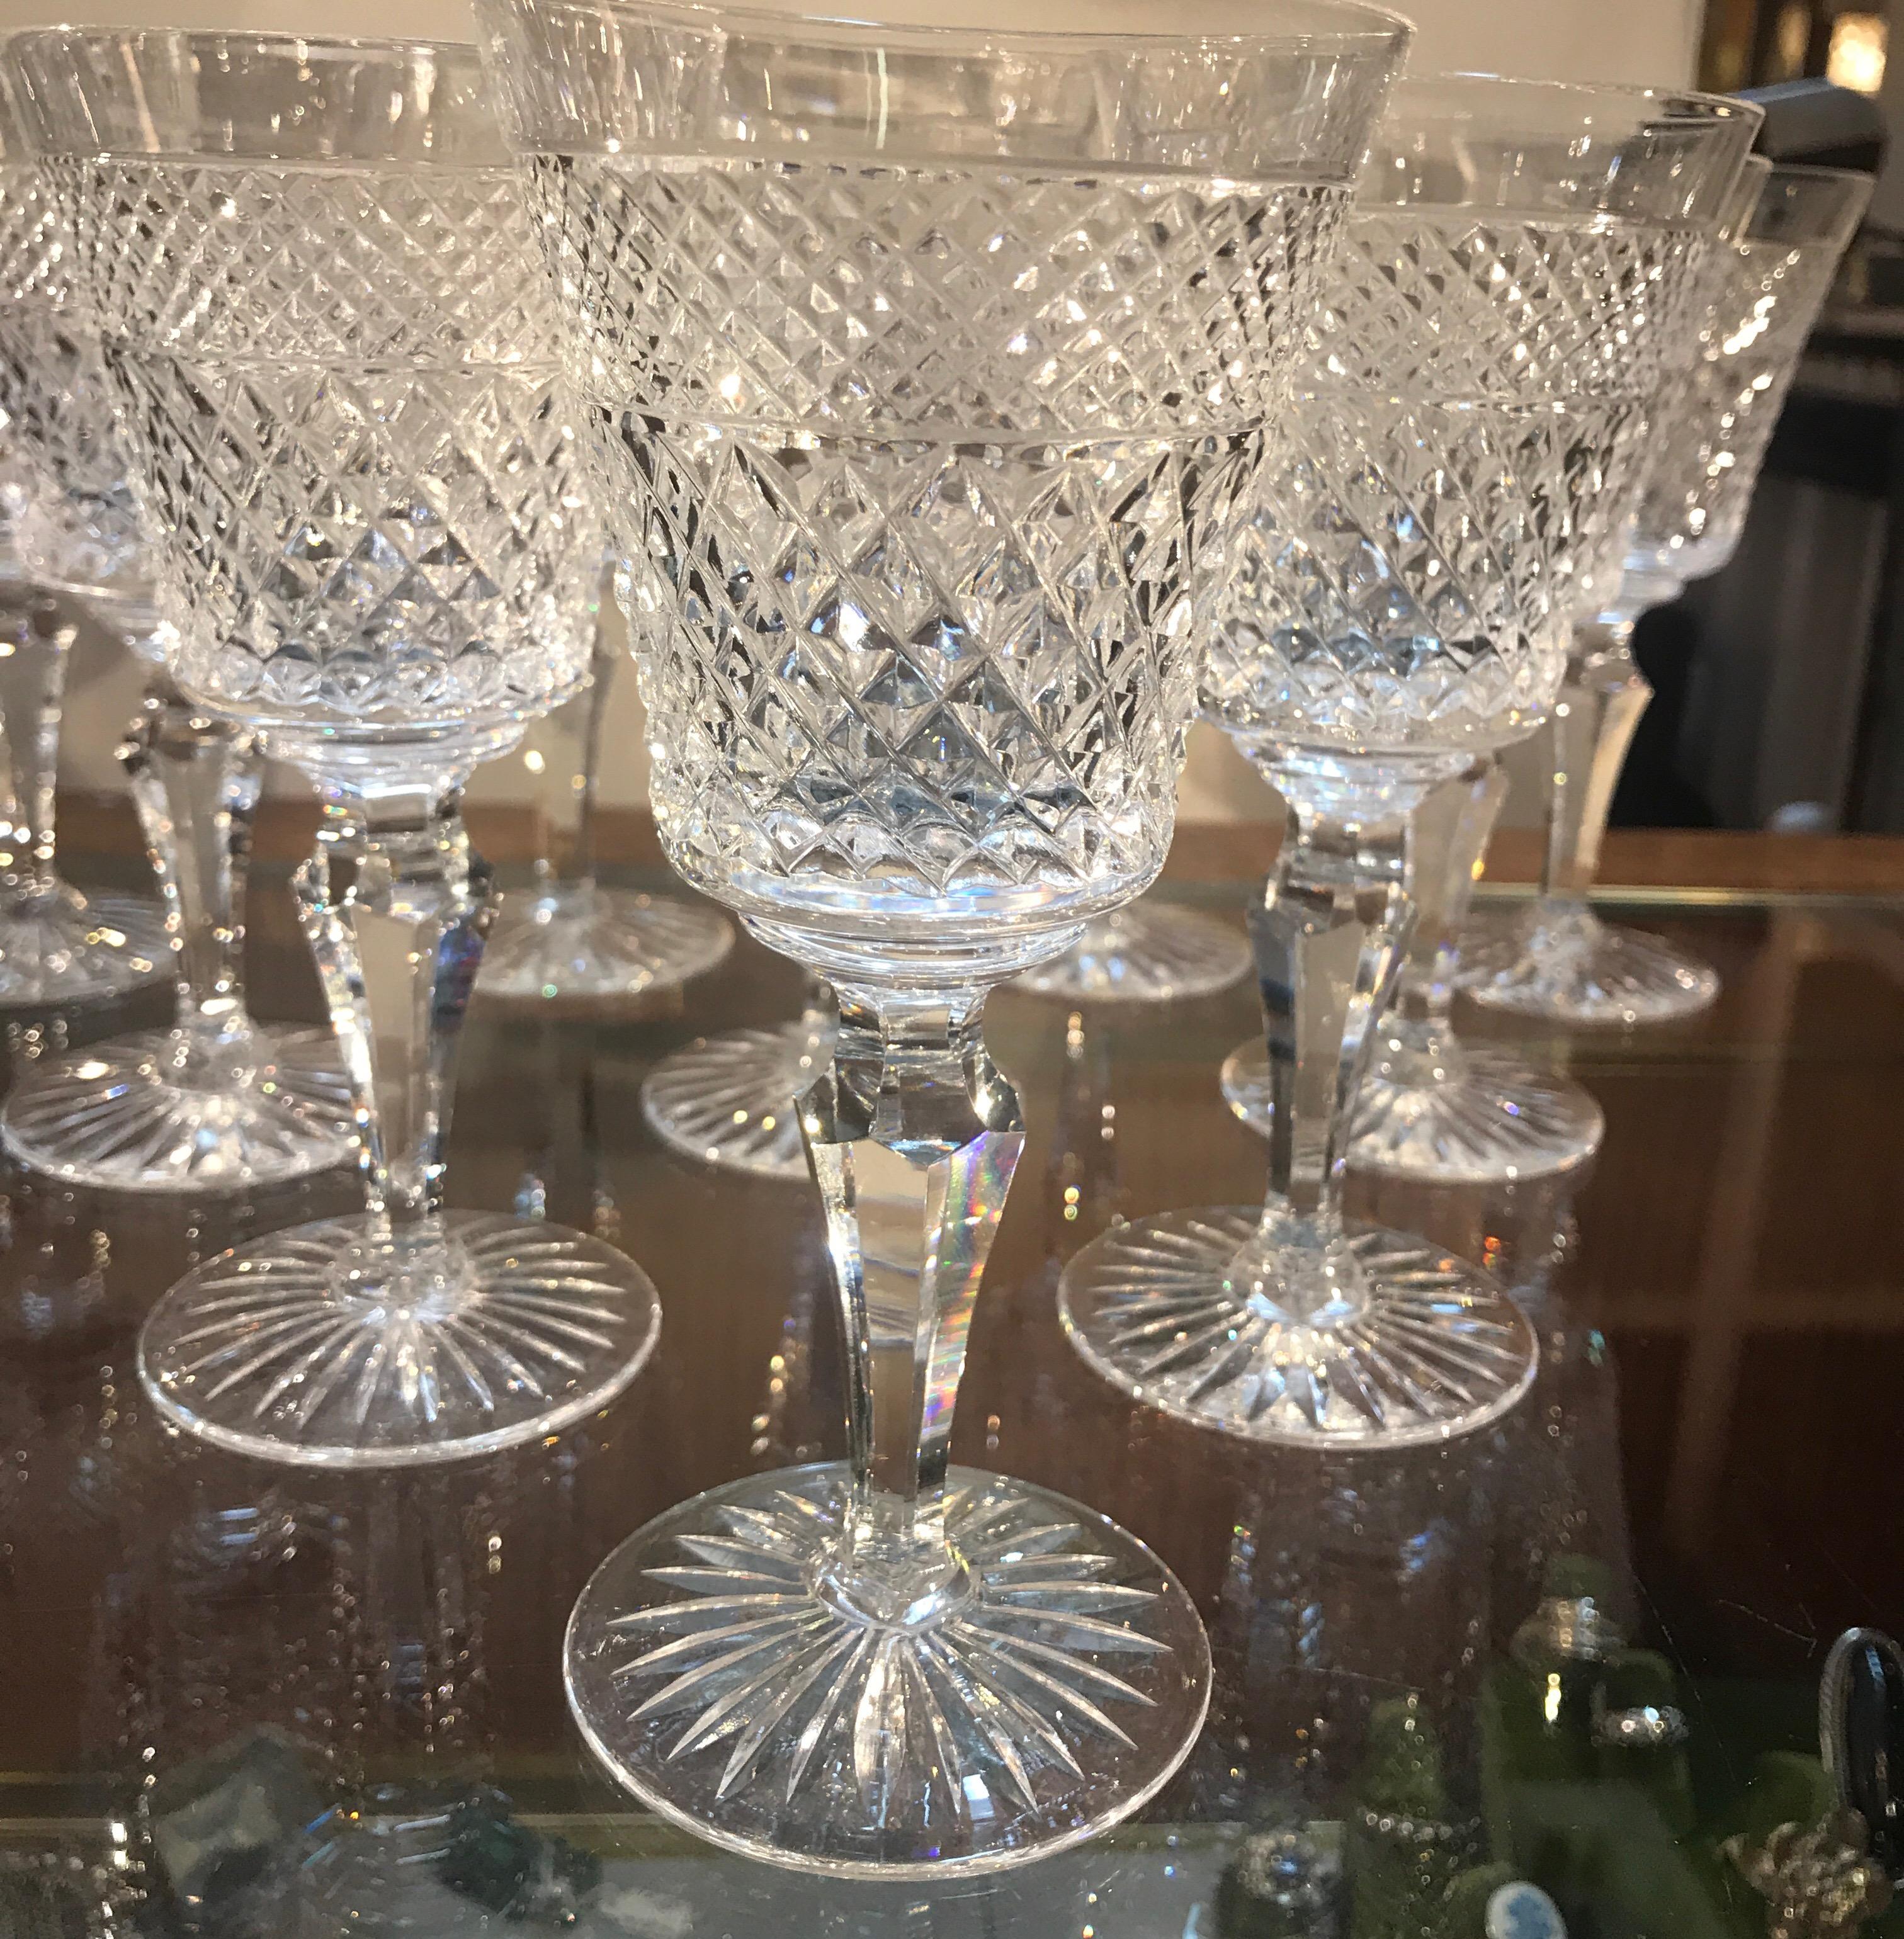 Elegant Edwardian style set of English wine stems by Royal Doulton. The Classic diamond cut bowls with panel cut stems and starburst bases. These are the retired Carylye pattern, in perfect condition. Measuring: 6 3/8 inches tall.